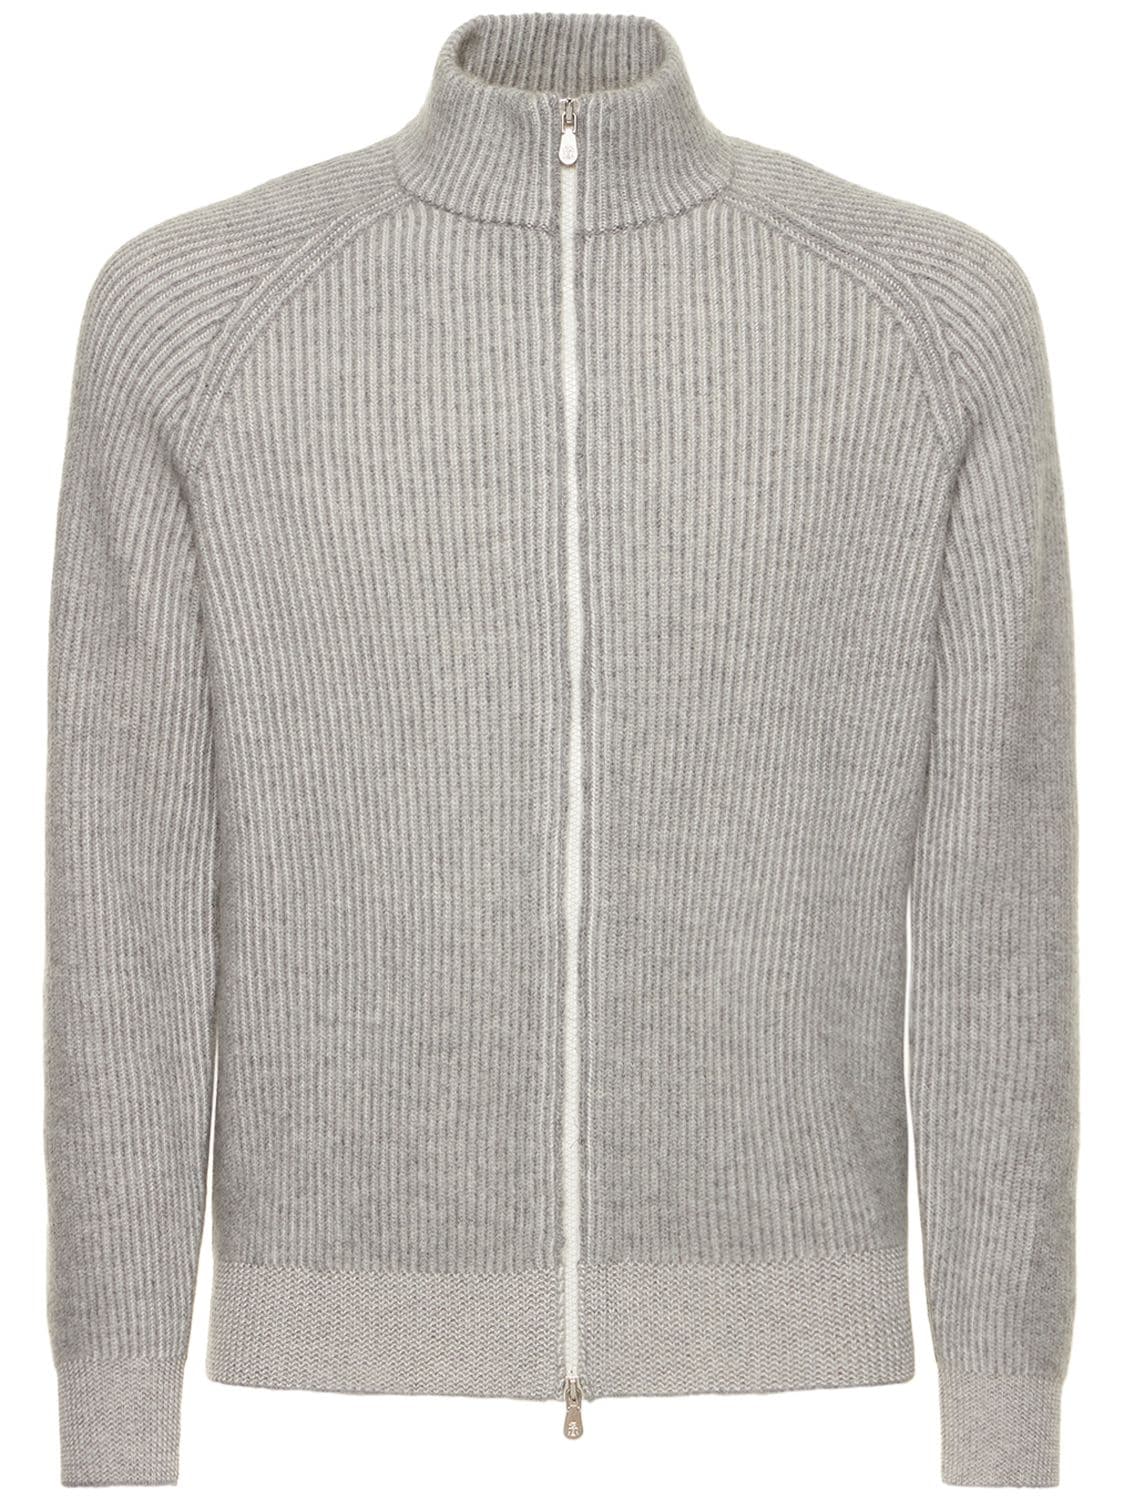 Cashmere Knit Zip Sweater